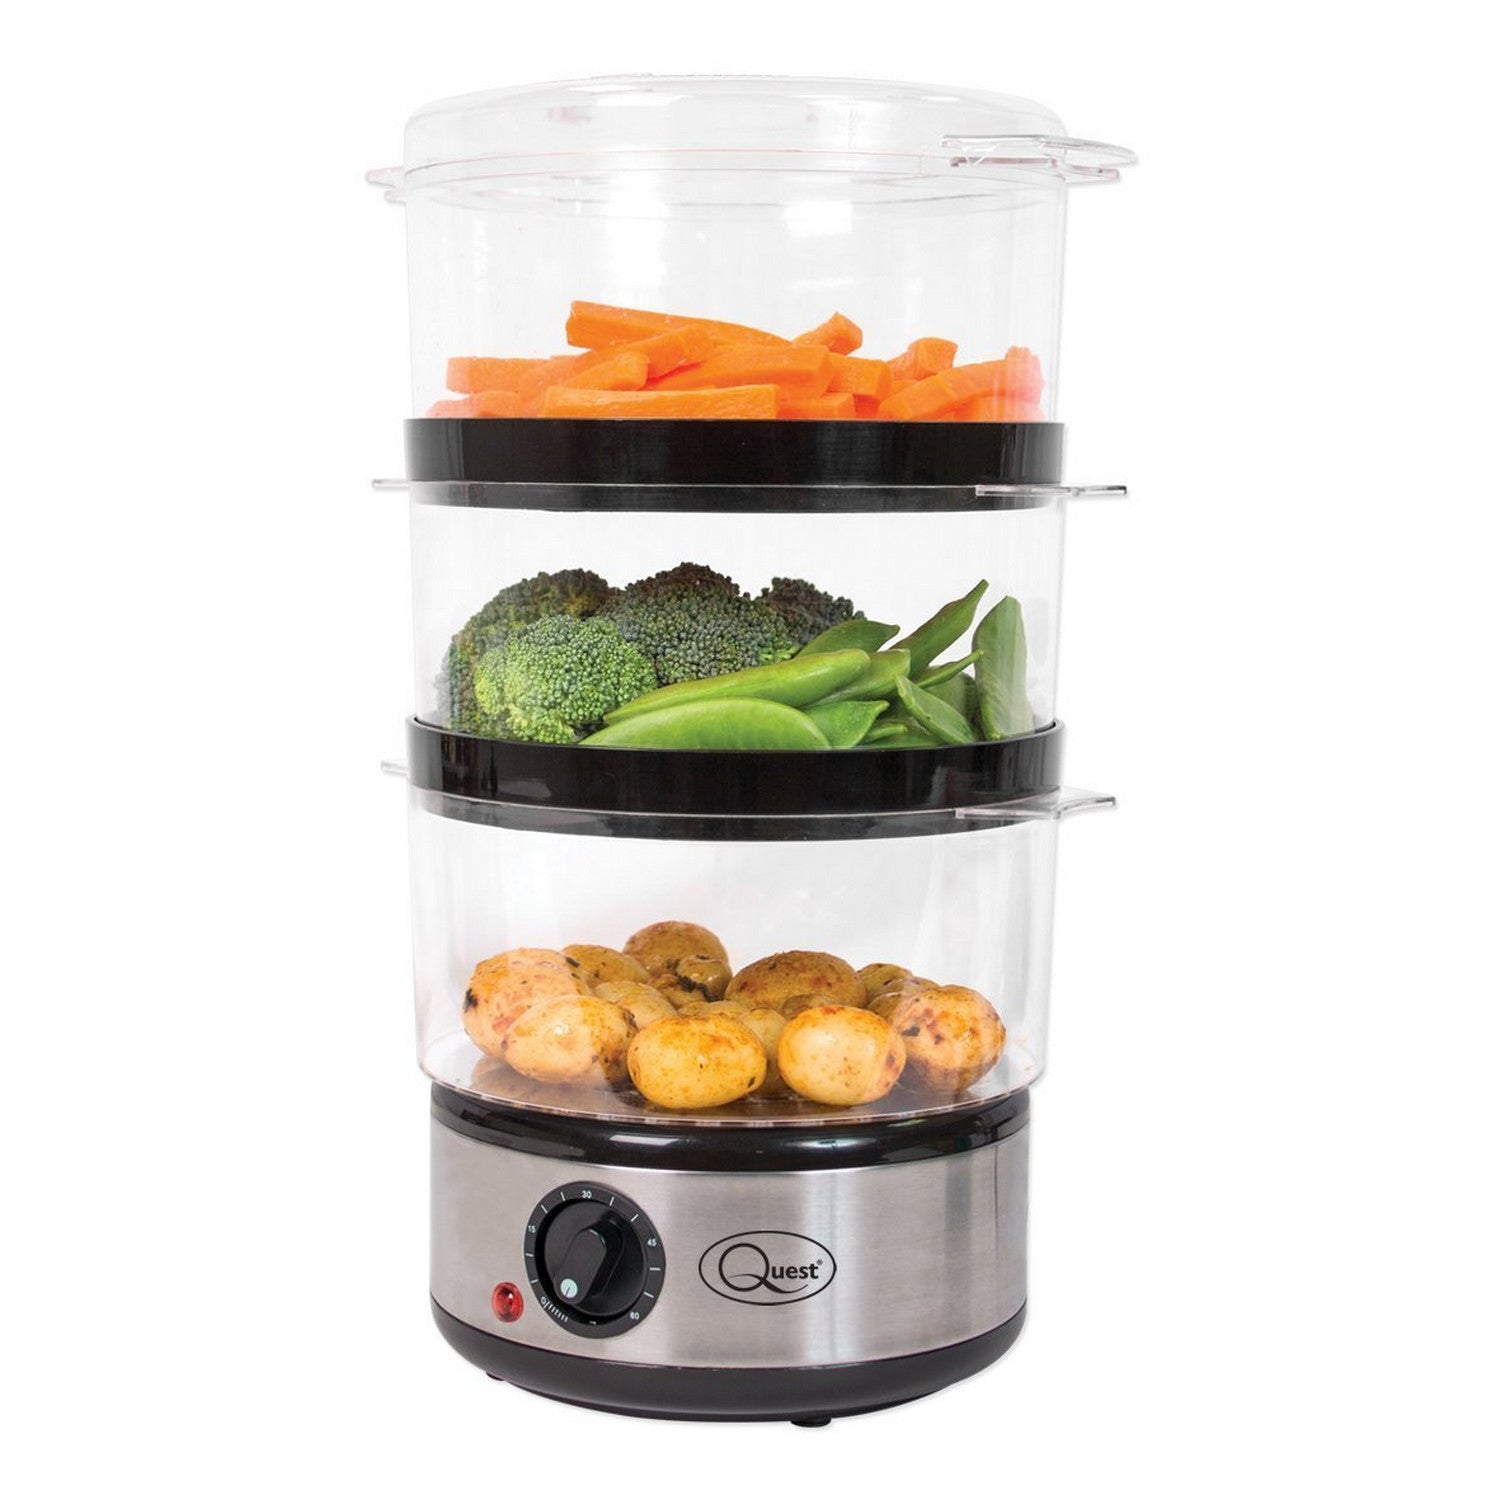 Quest 3 Layer Electric Compact 6litre Food Steamer